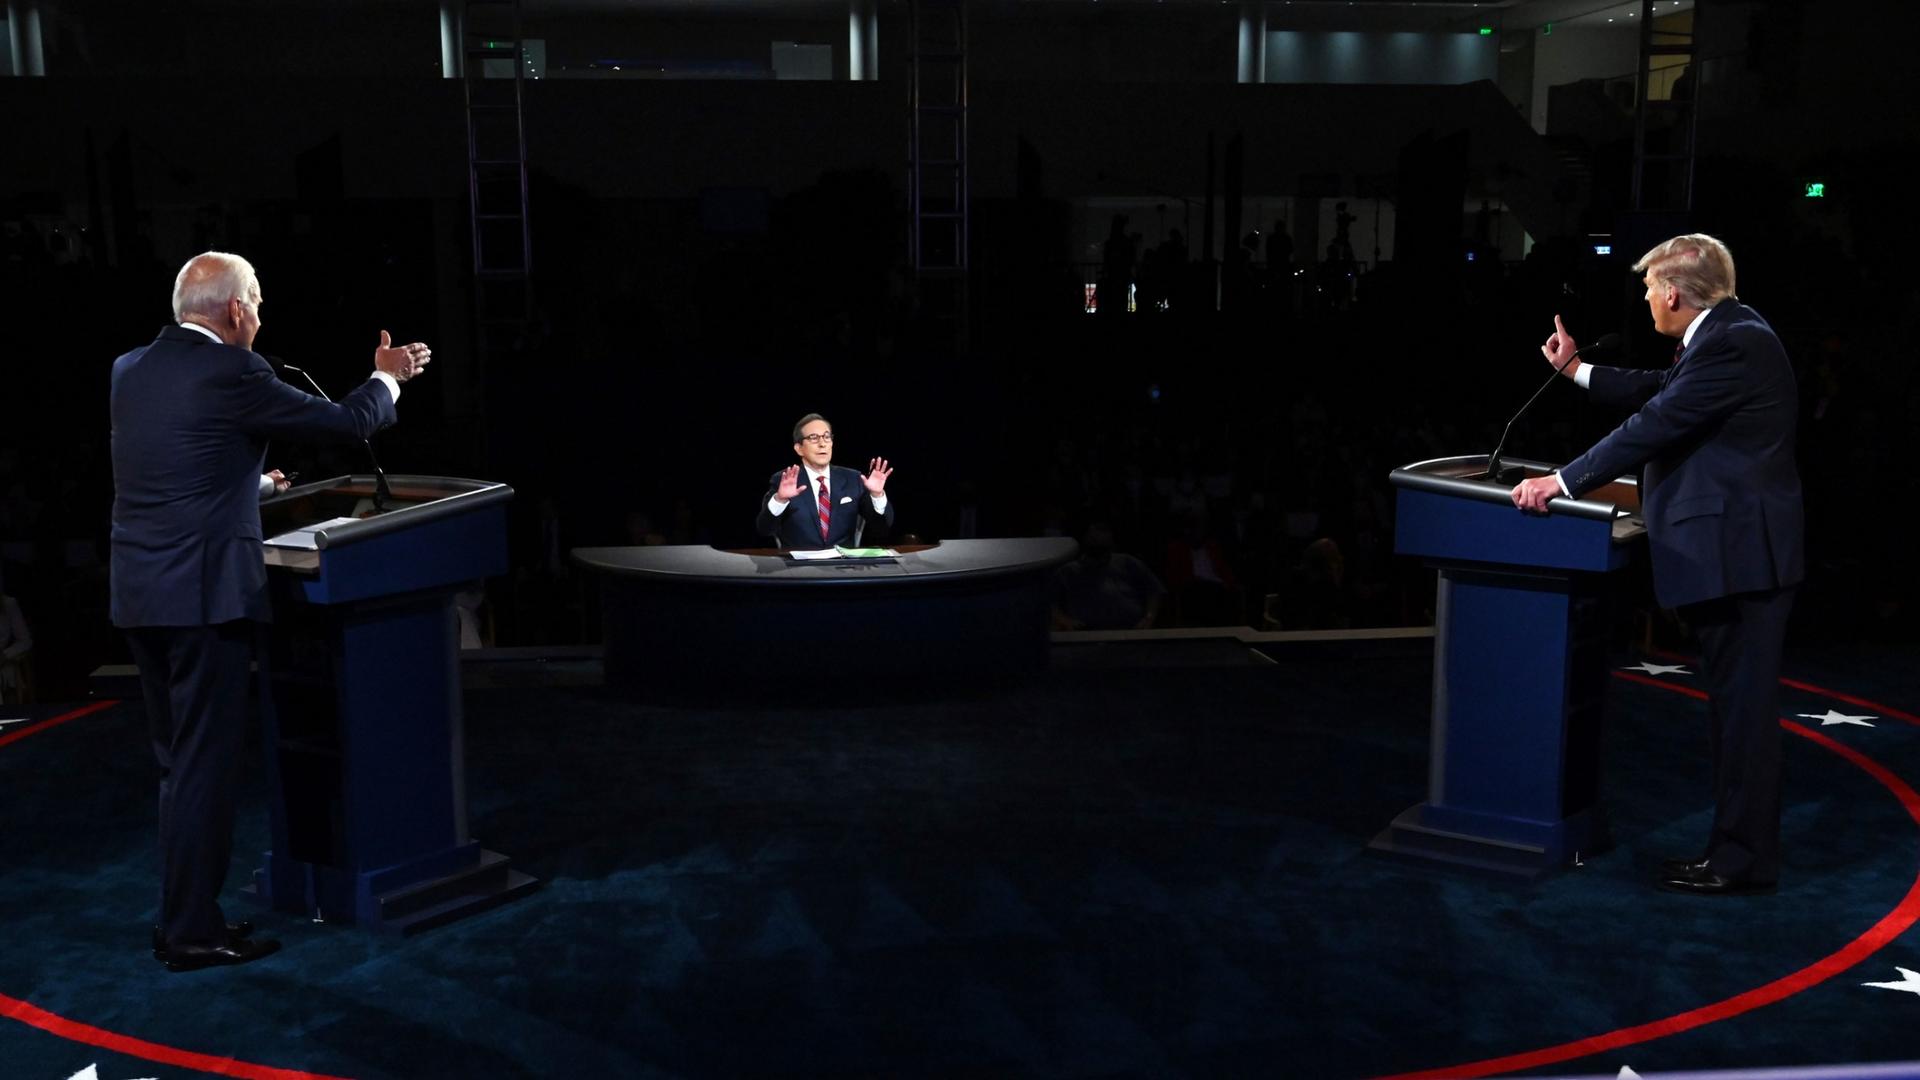 President Donald Trump and Democratic presidential candidate former Vice President Joe Biden are shown on either side of the photo, each standing at a podium and facing a moderator.